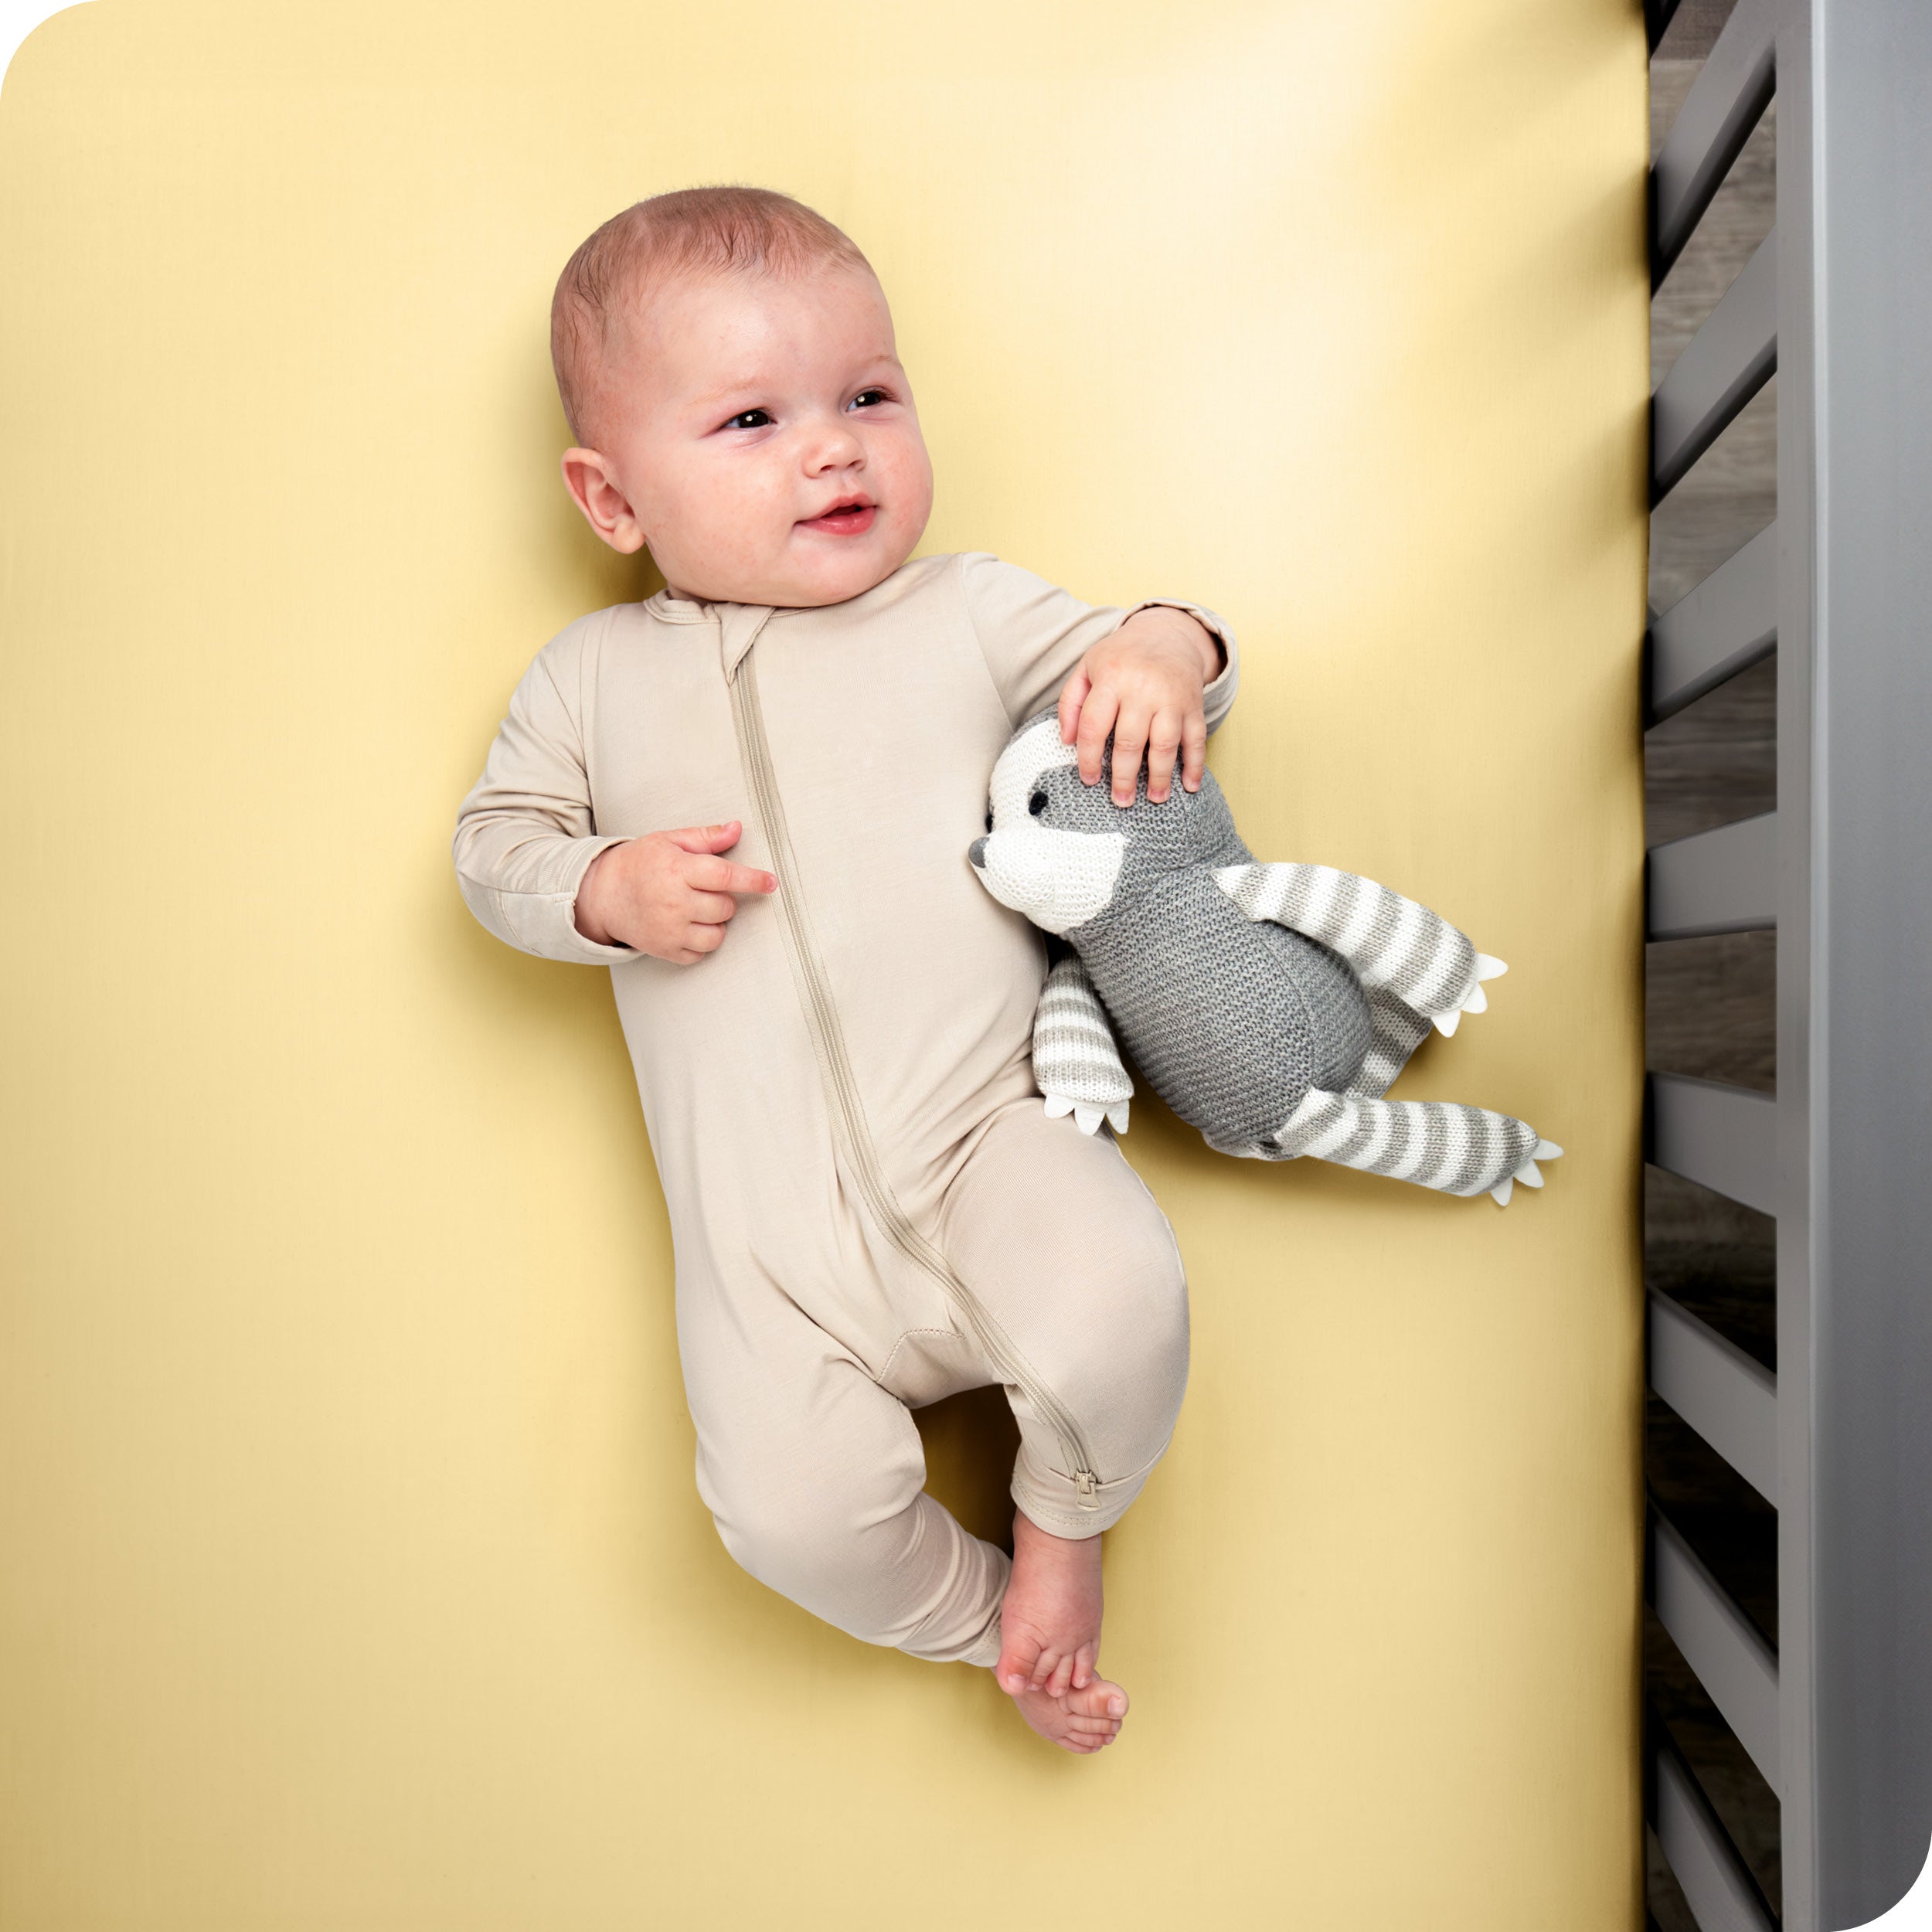 A peaceful baby rests in a crib with a stuffed animal.